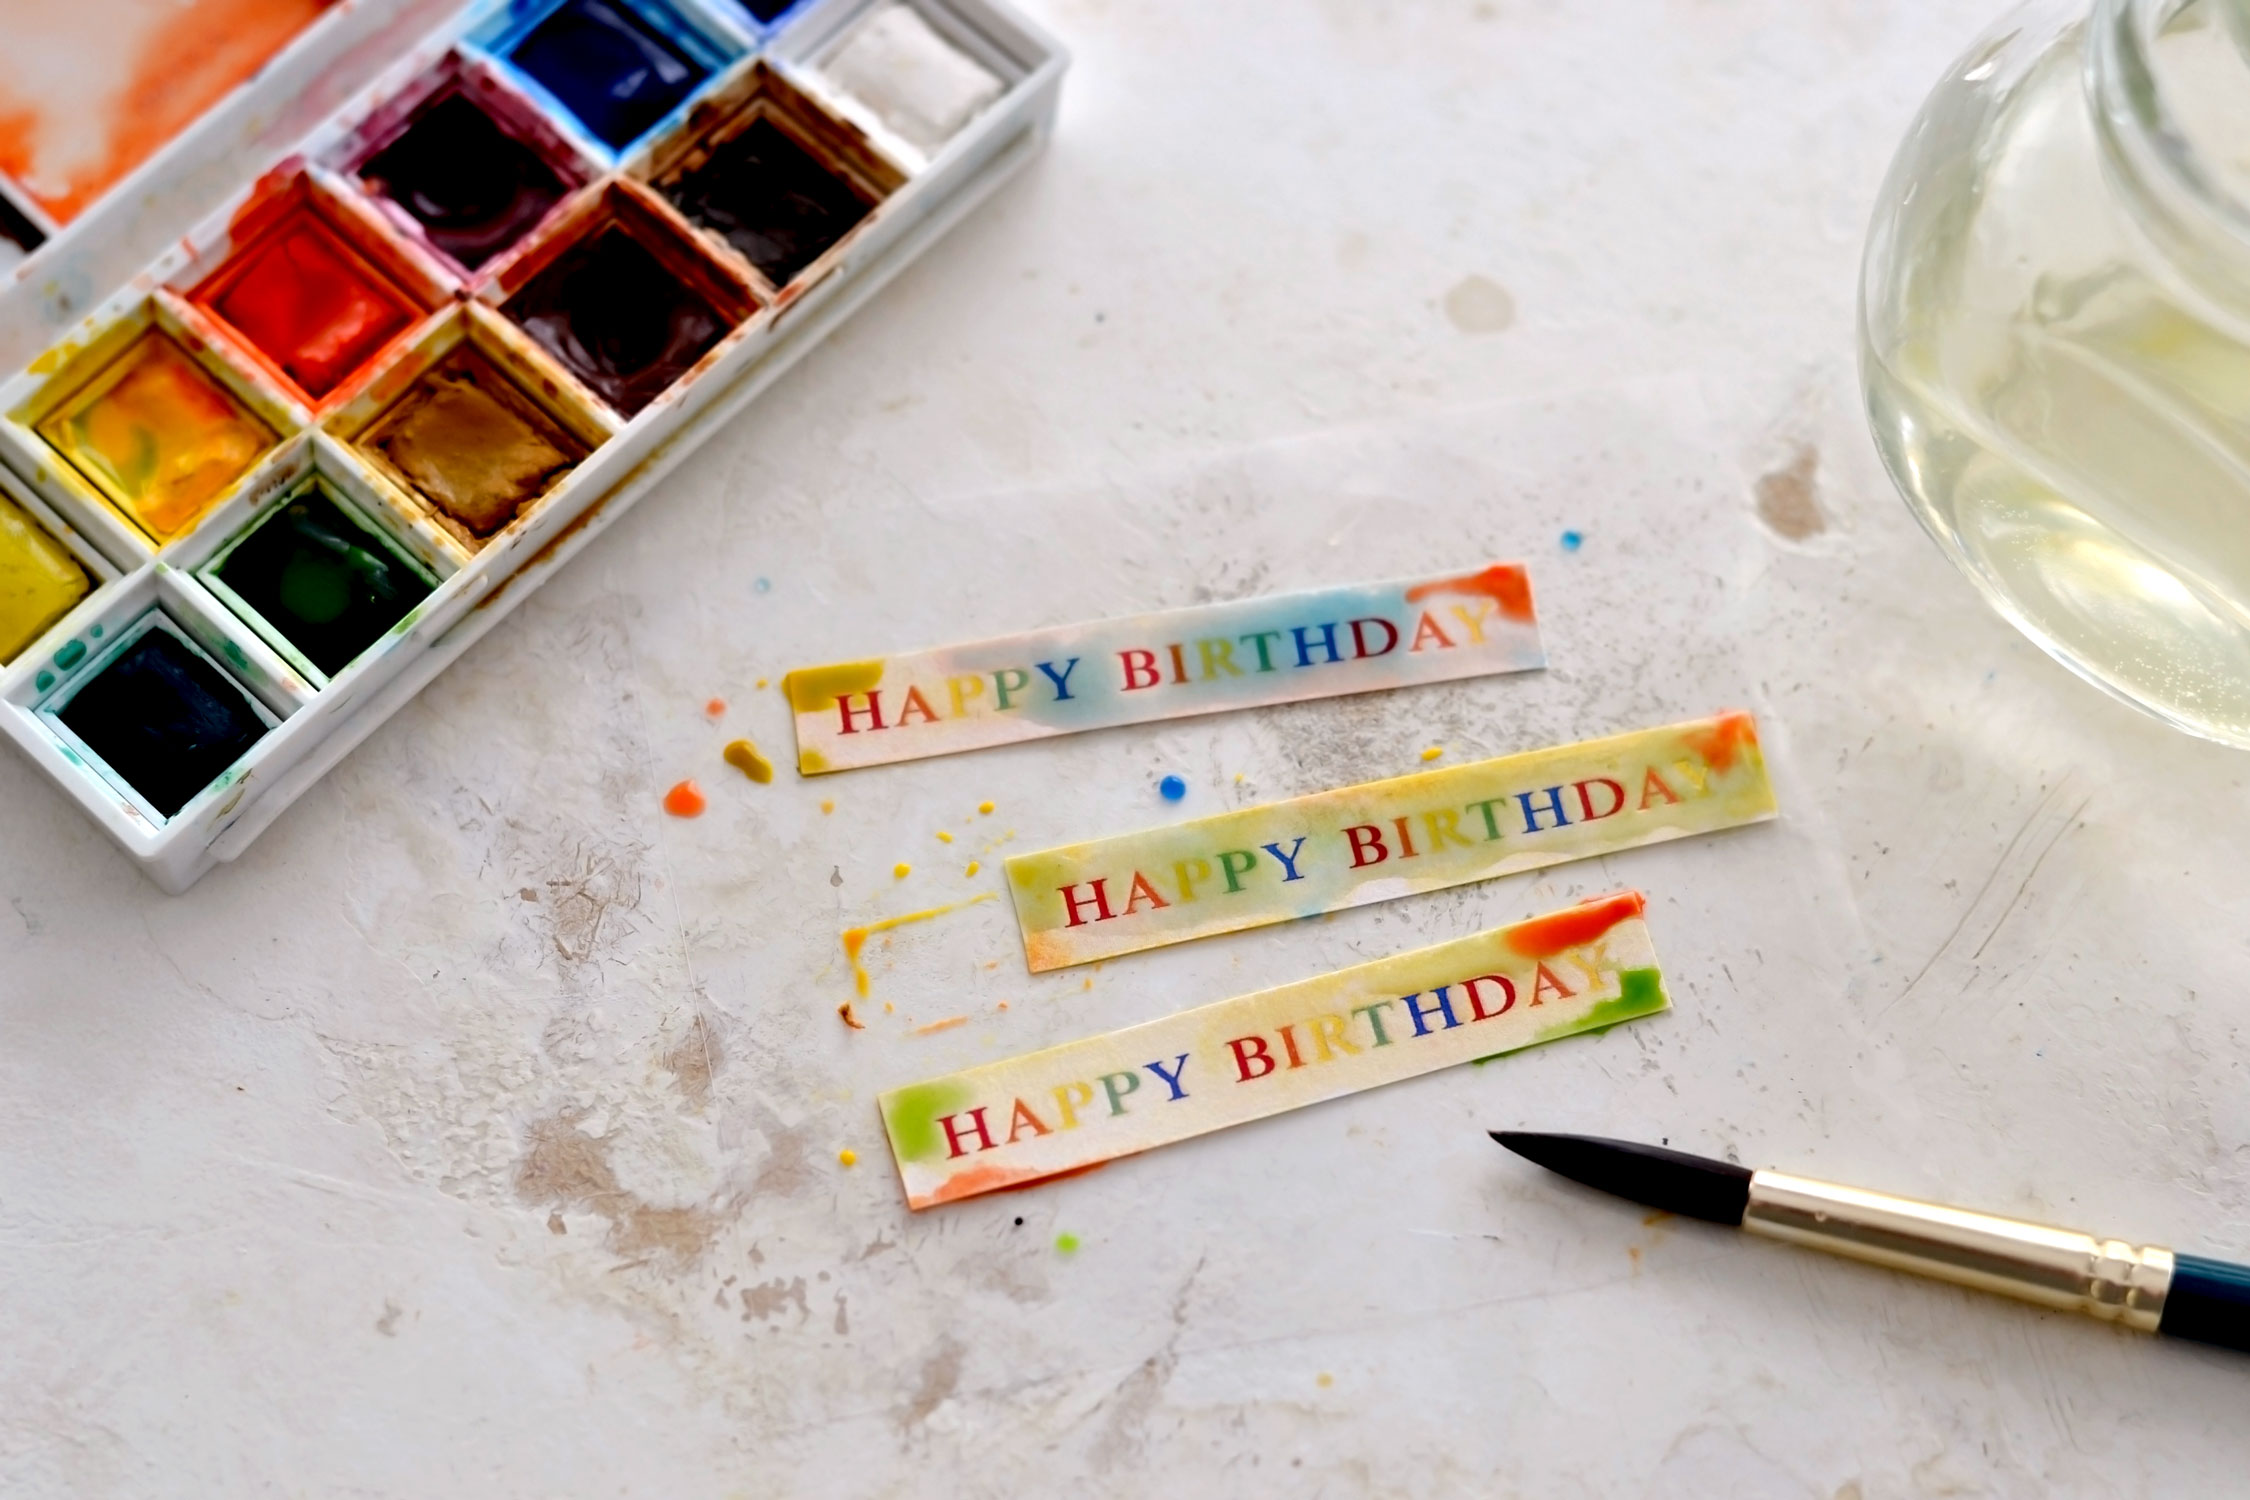 painting the birthday wishes with watercolors